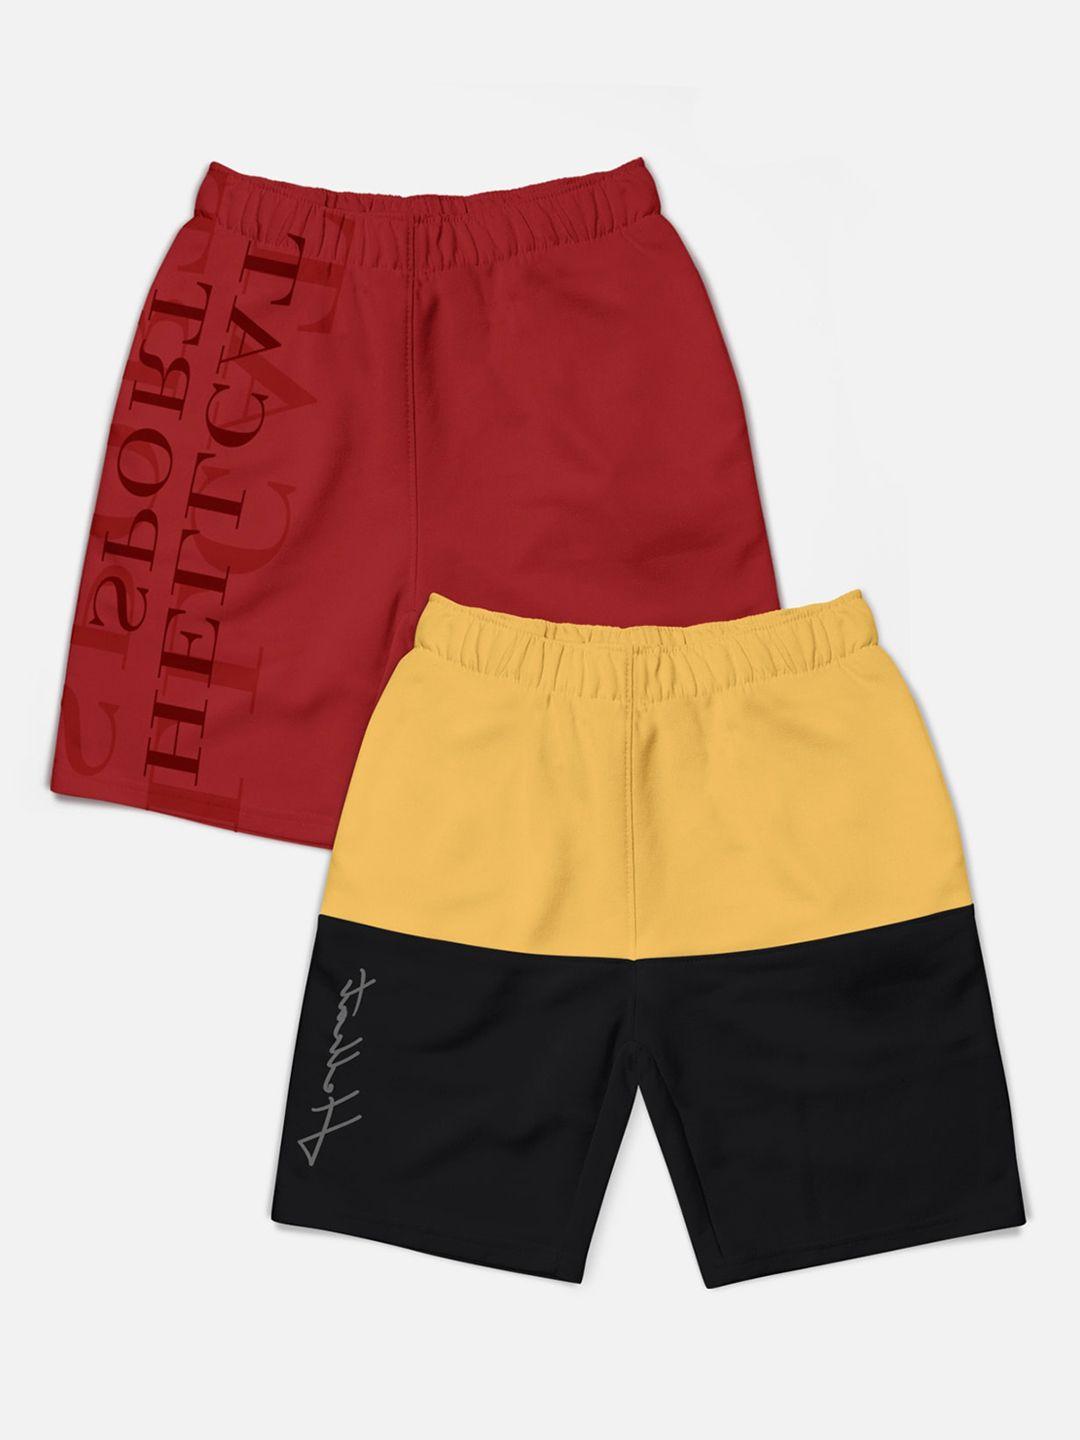 hellcat-boys-pack-of-2-typography-printed-cotton-shorts